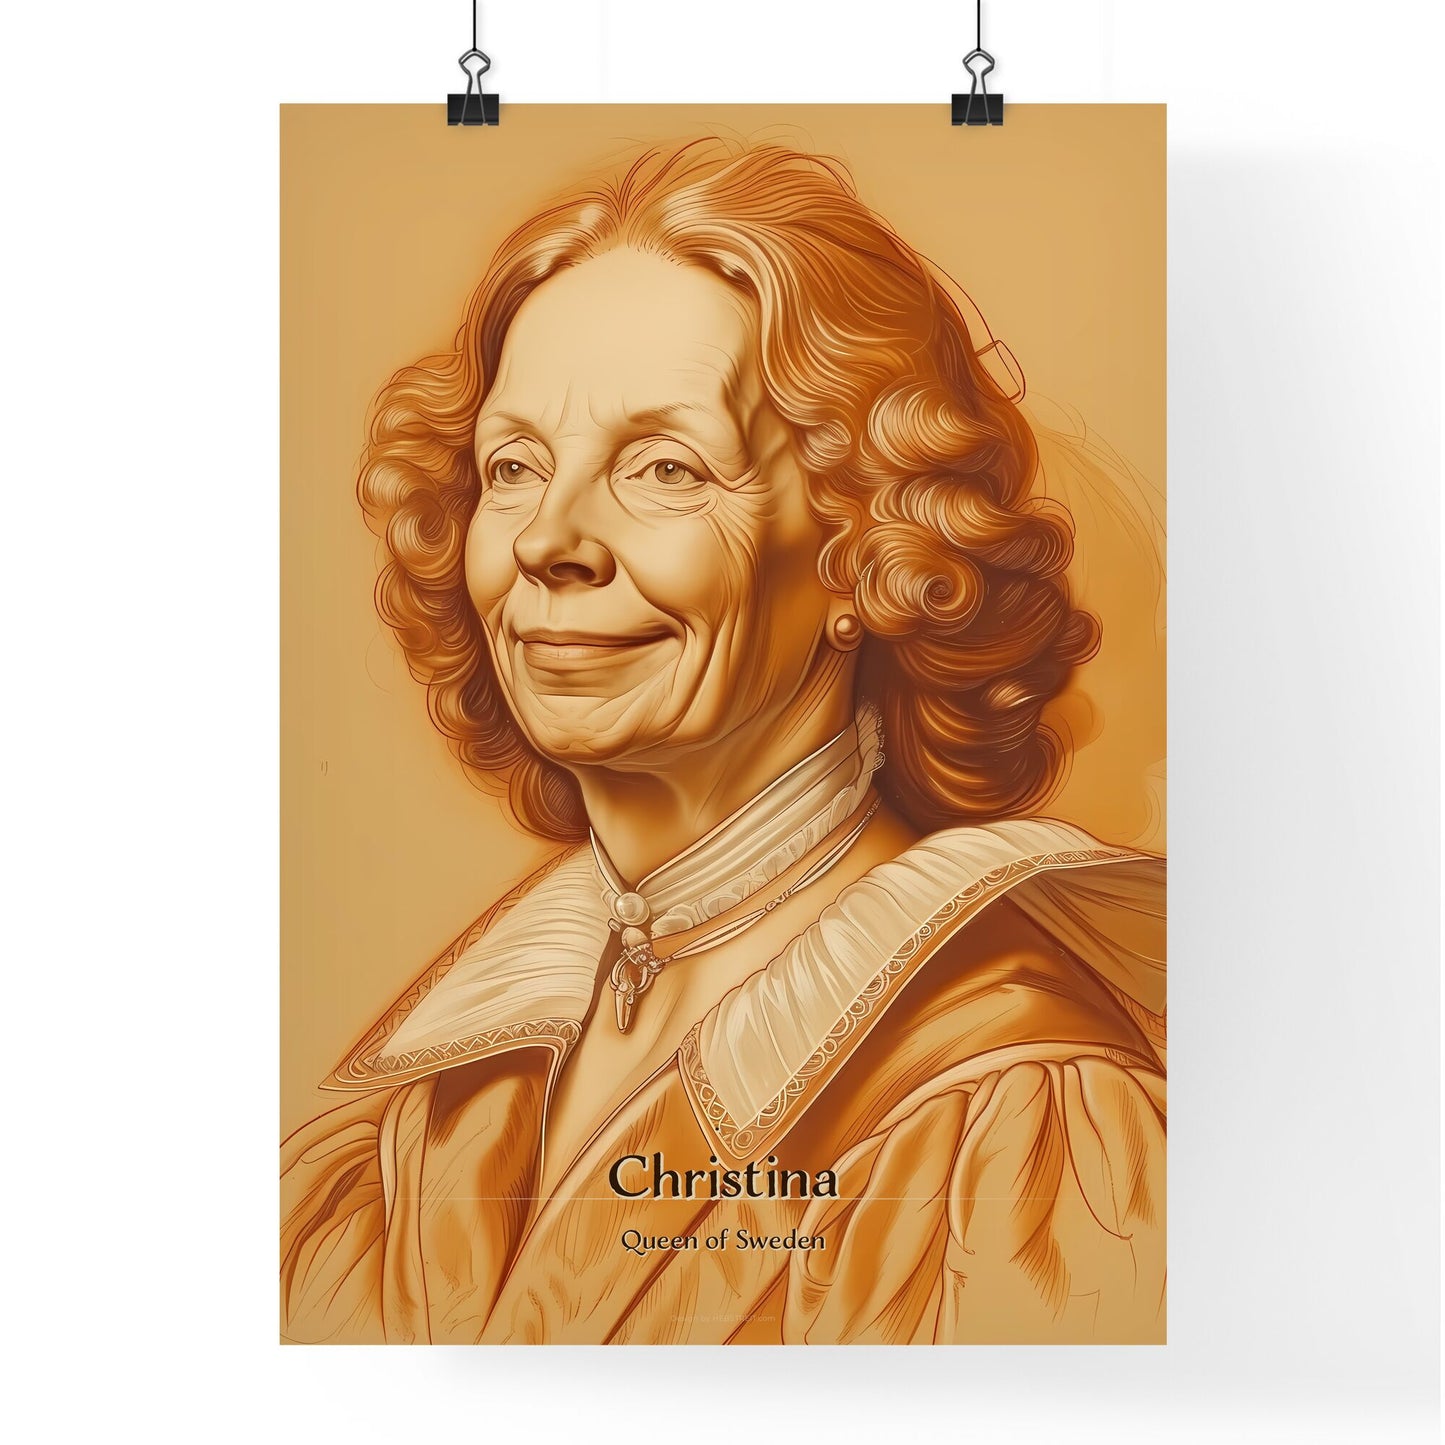 Christina, Queen of Sweden, A Poster of a woman with curly hair Default Title